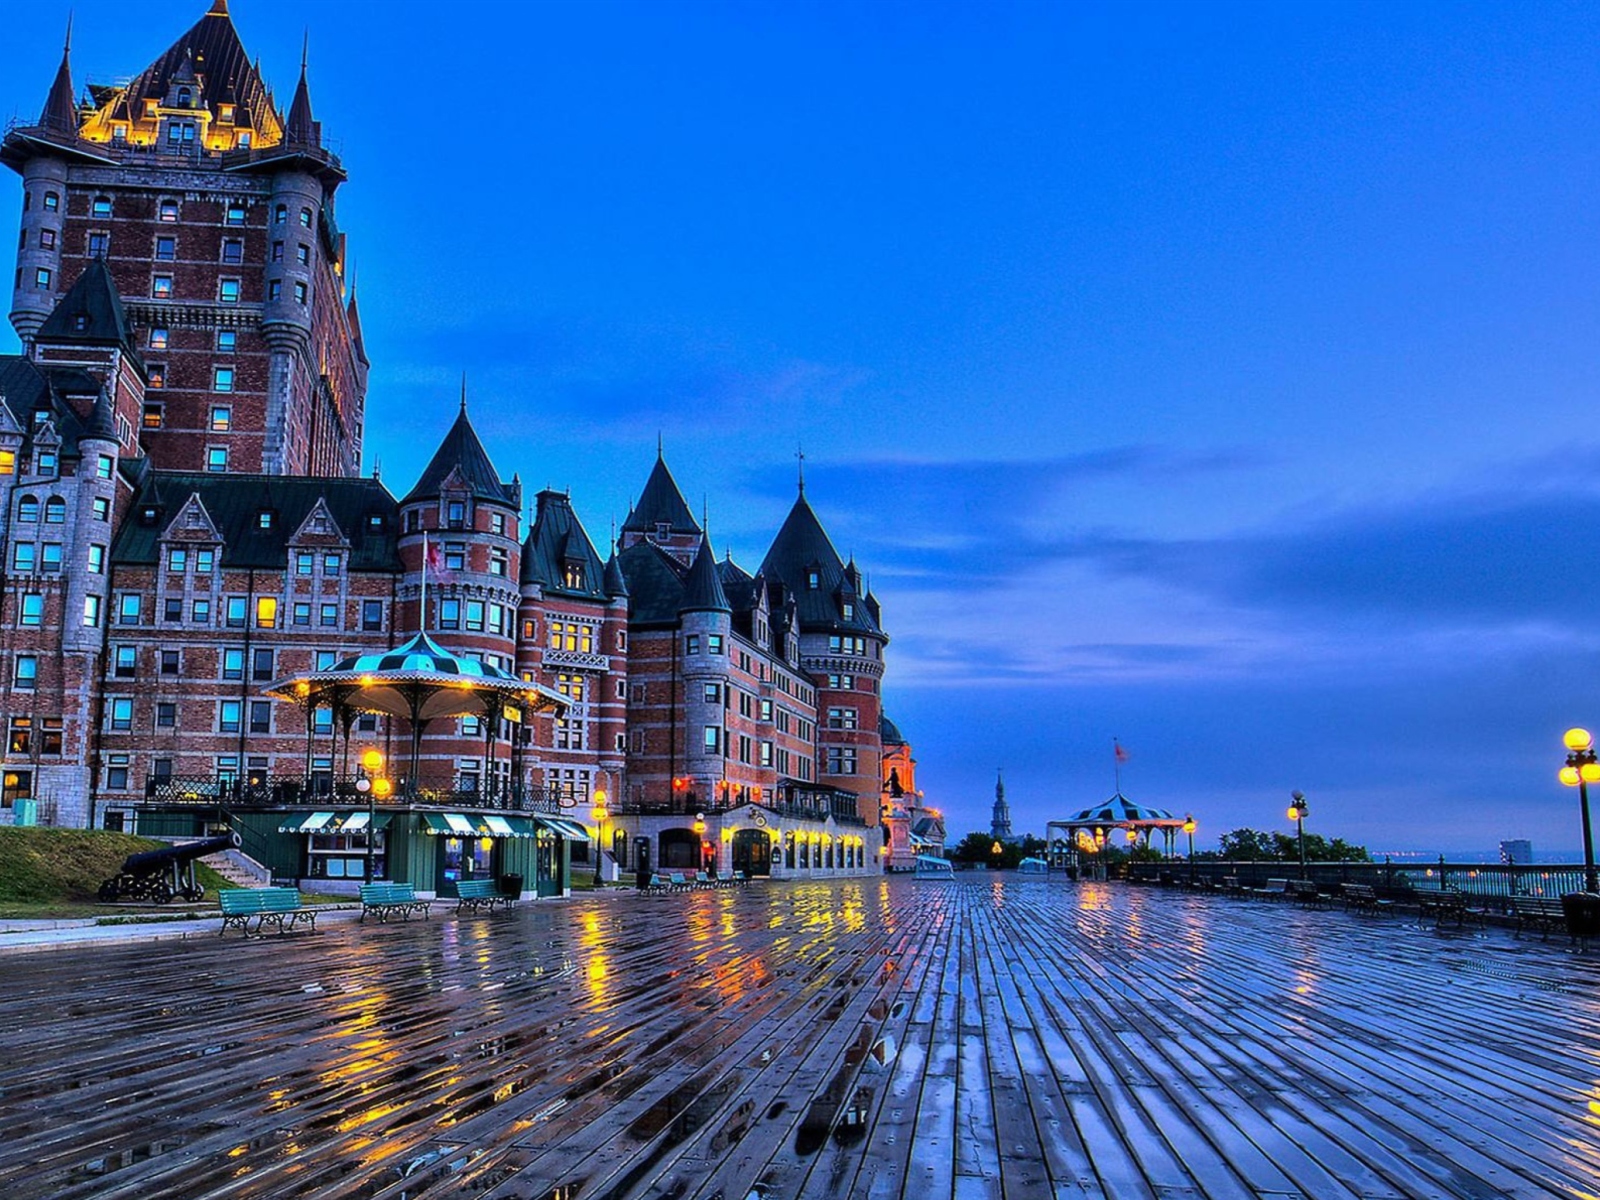 Château Frontenac - Grand Hotel in Quebec wallpaper 1600x1200